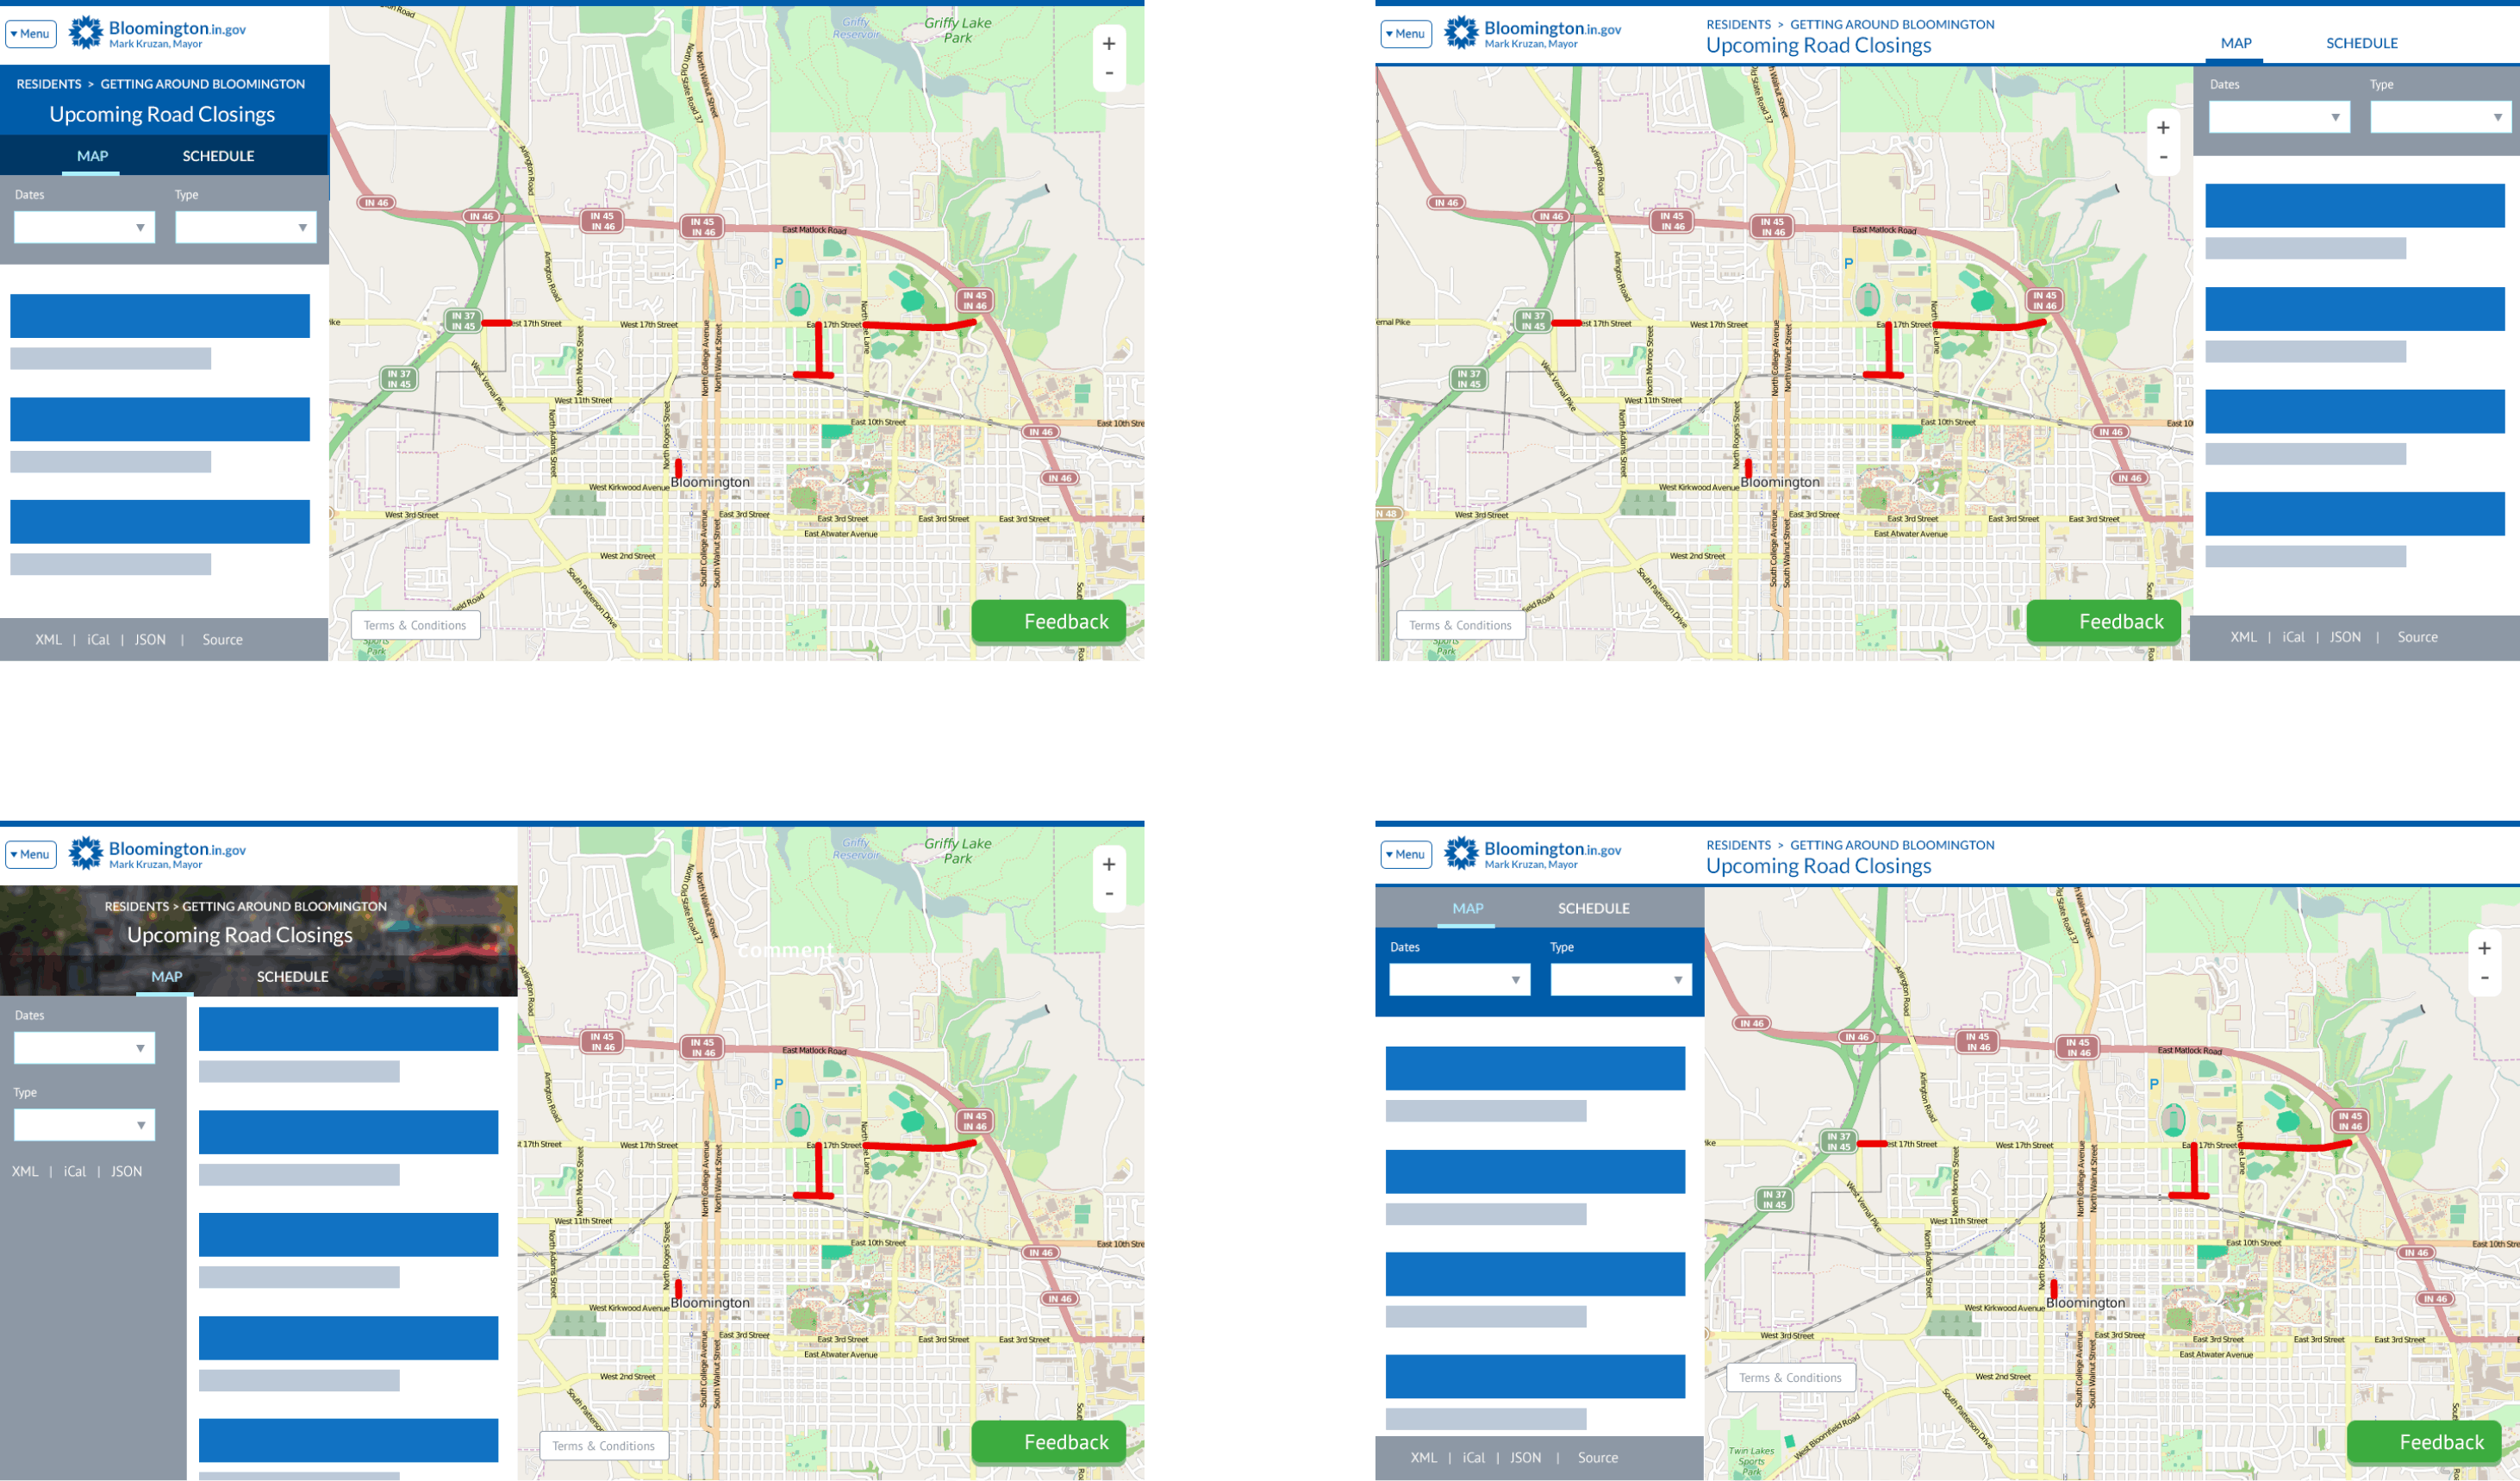 A screen shot showing four wireframes that show different approaches to the overall layout, elements of maps, and amorphous blocks representing elements to be designed later.